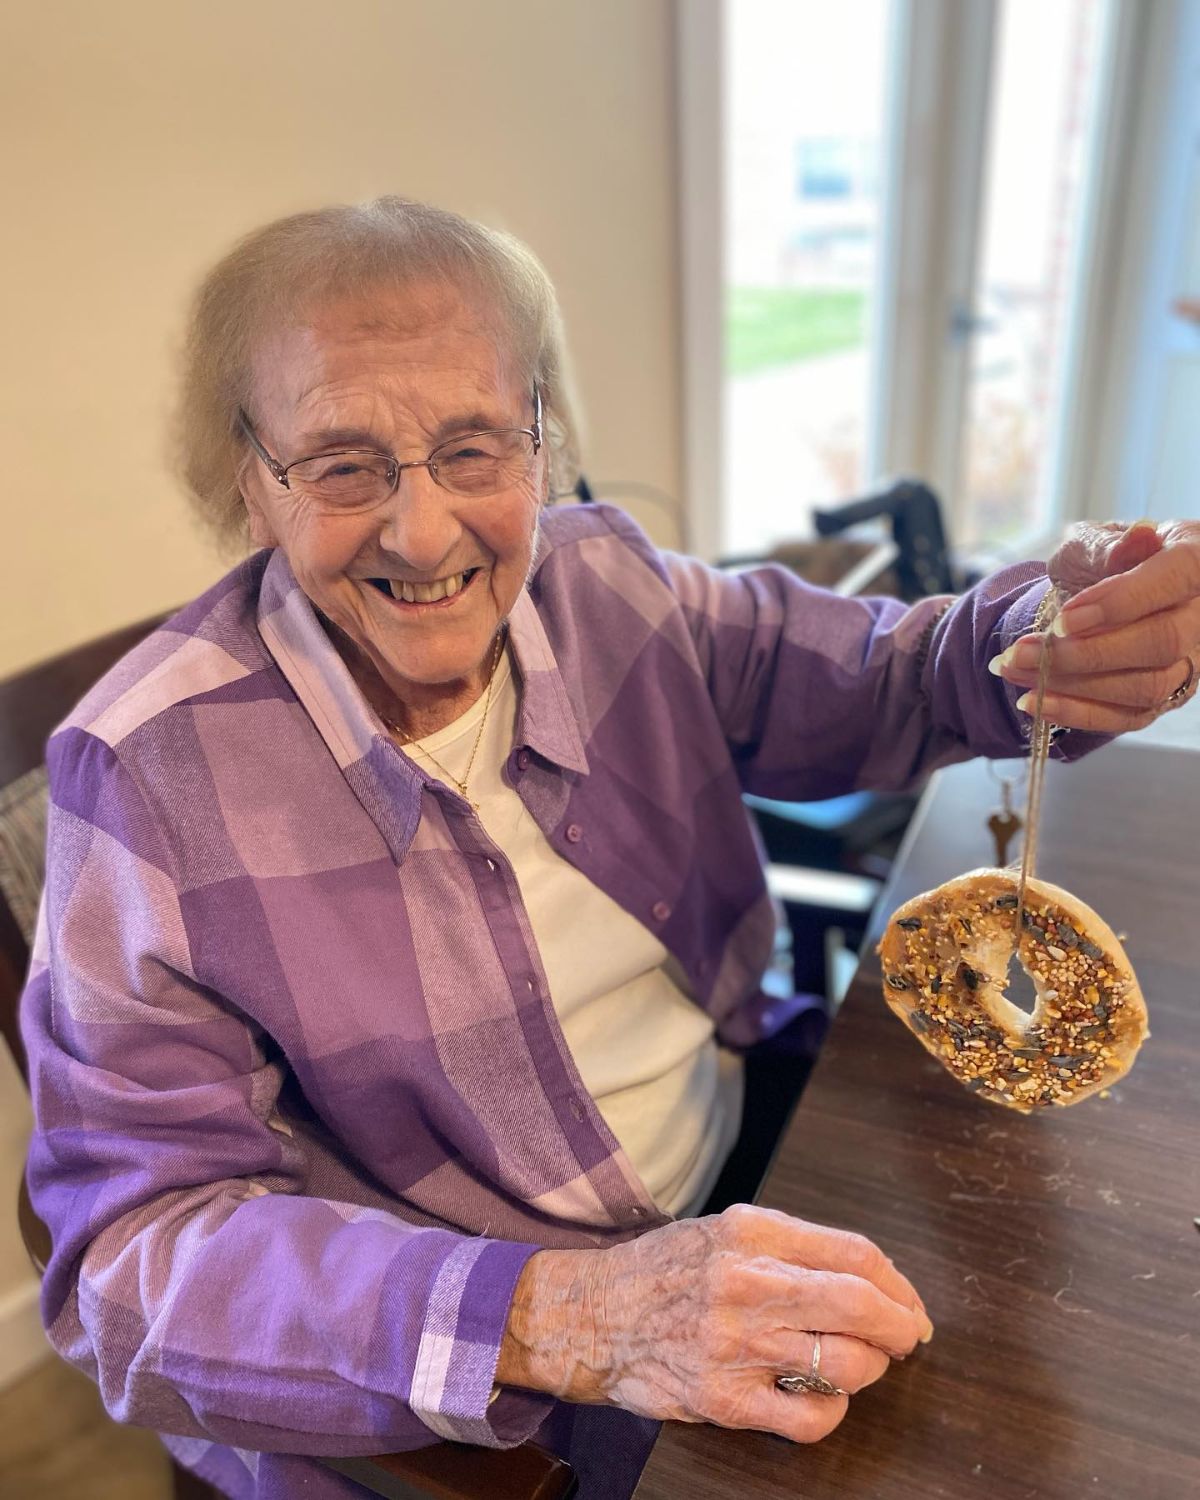 Resident creating a treat for birds at Carriage Court Senior Living in Hilliard, OH